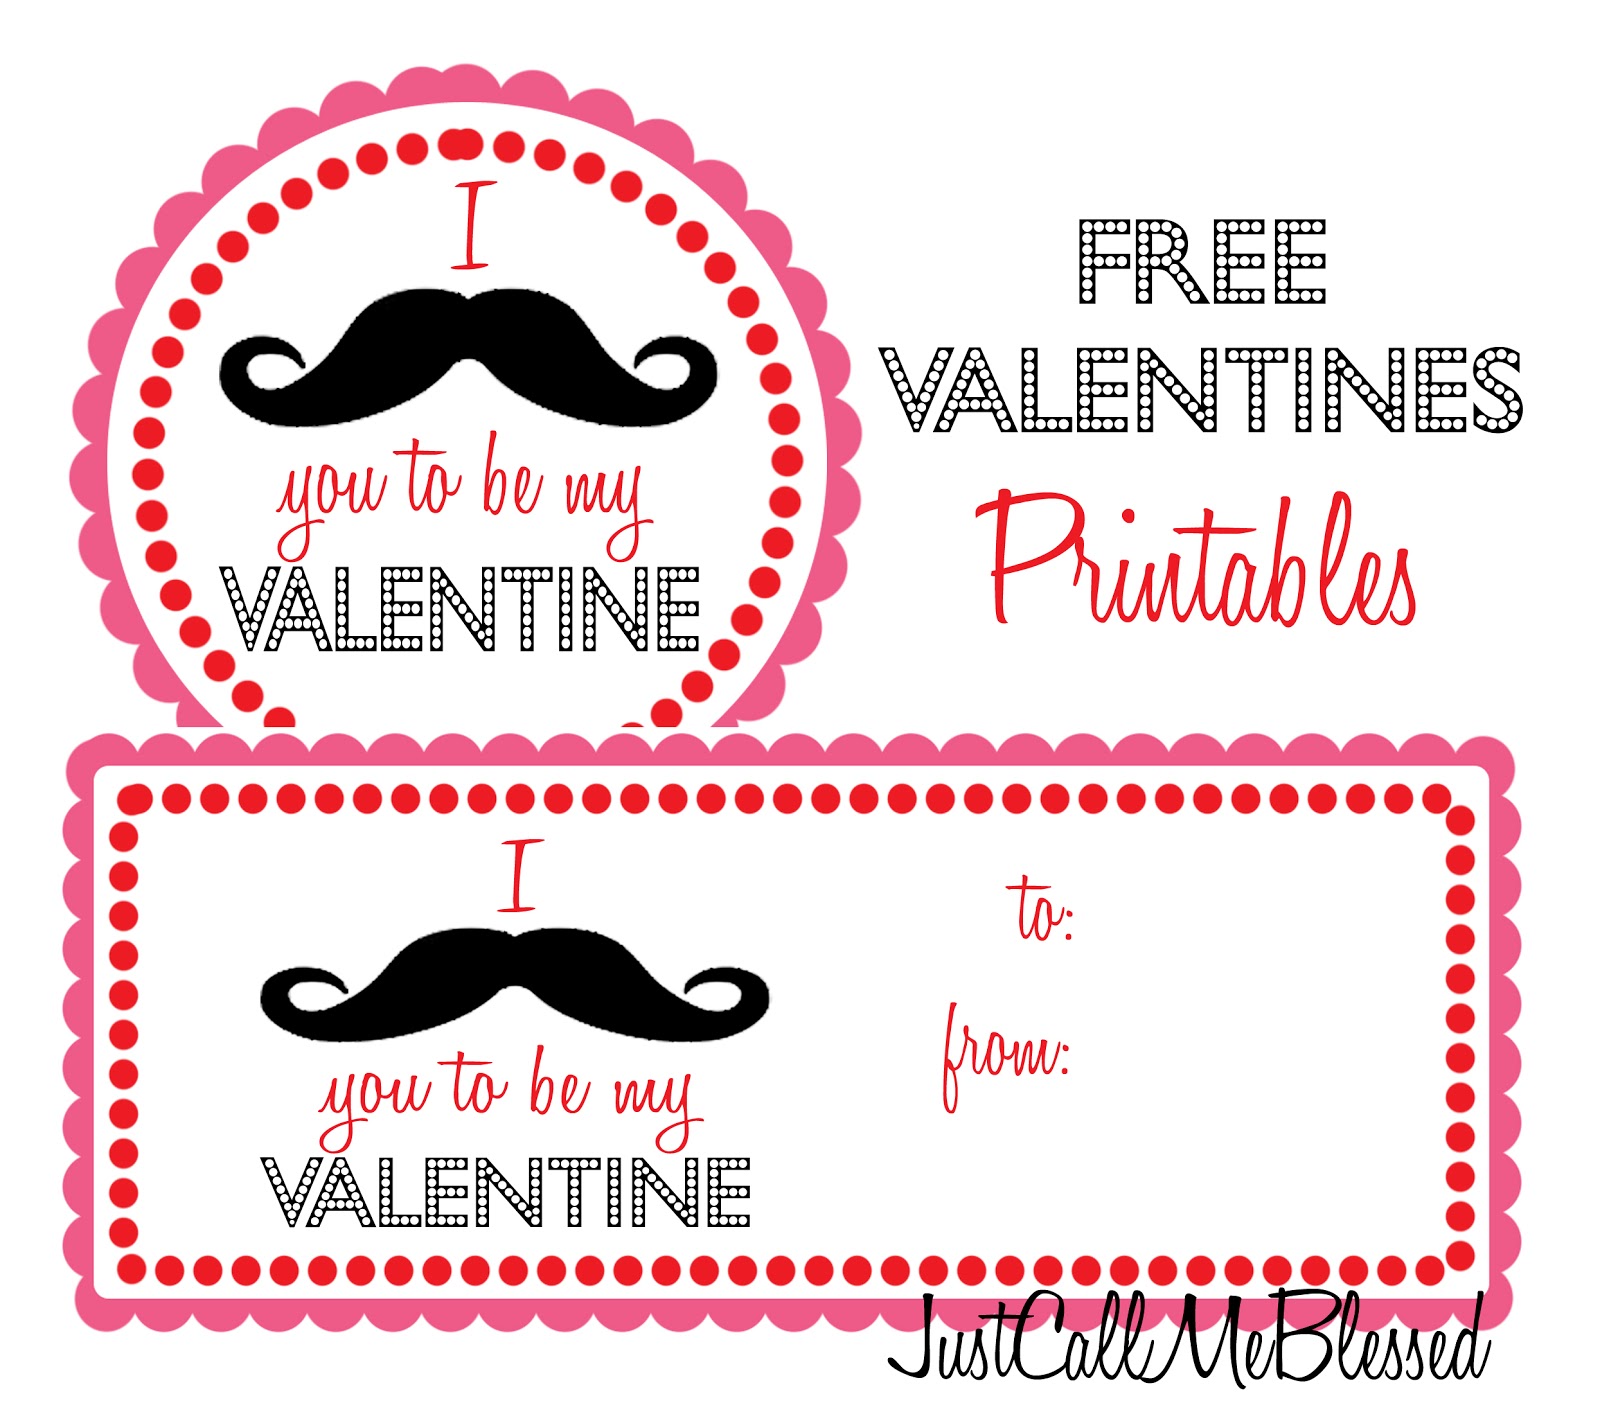 justcallmeblessed: Valentines Day Free Printable!